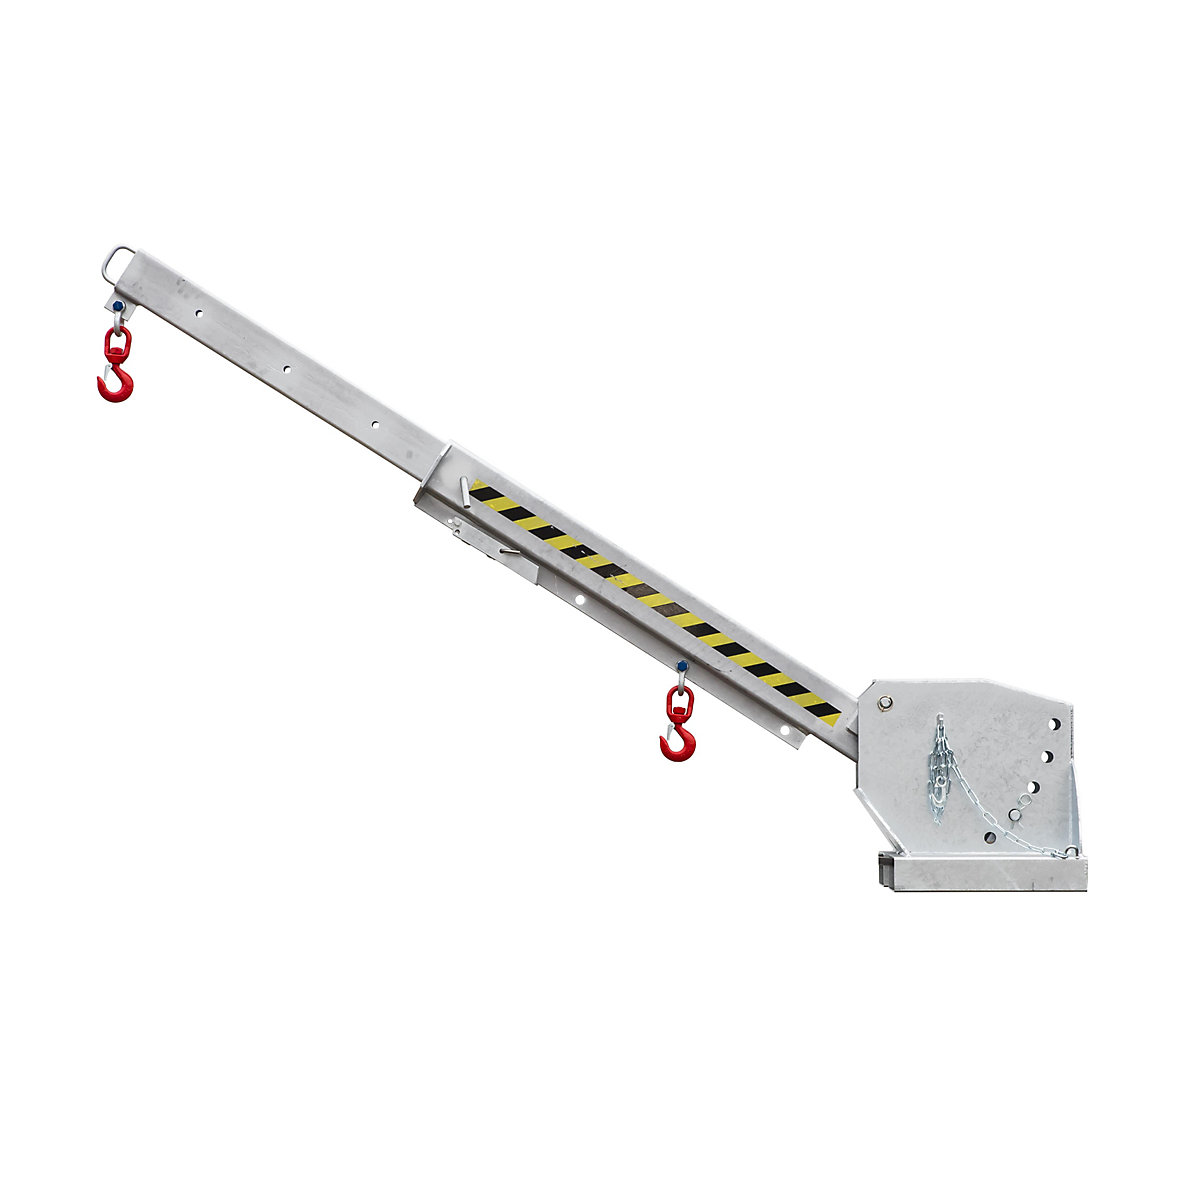 Telescopic loader – eurokraft pro, height adjustable in 5 stages, max. load 1000 – 5000 kg, telescopic, zinc plated